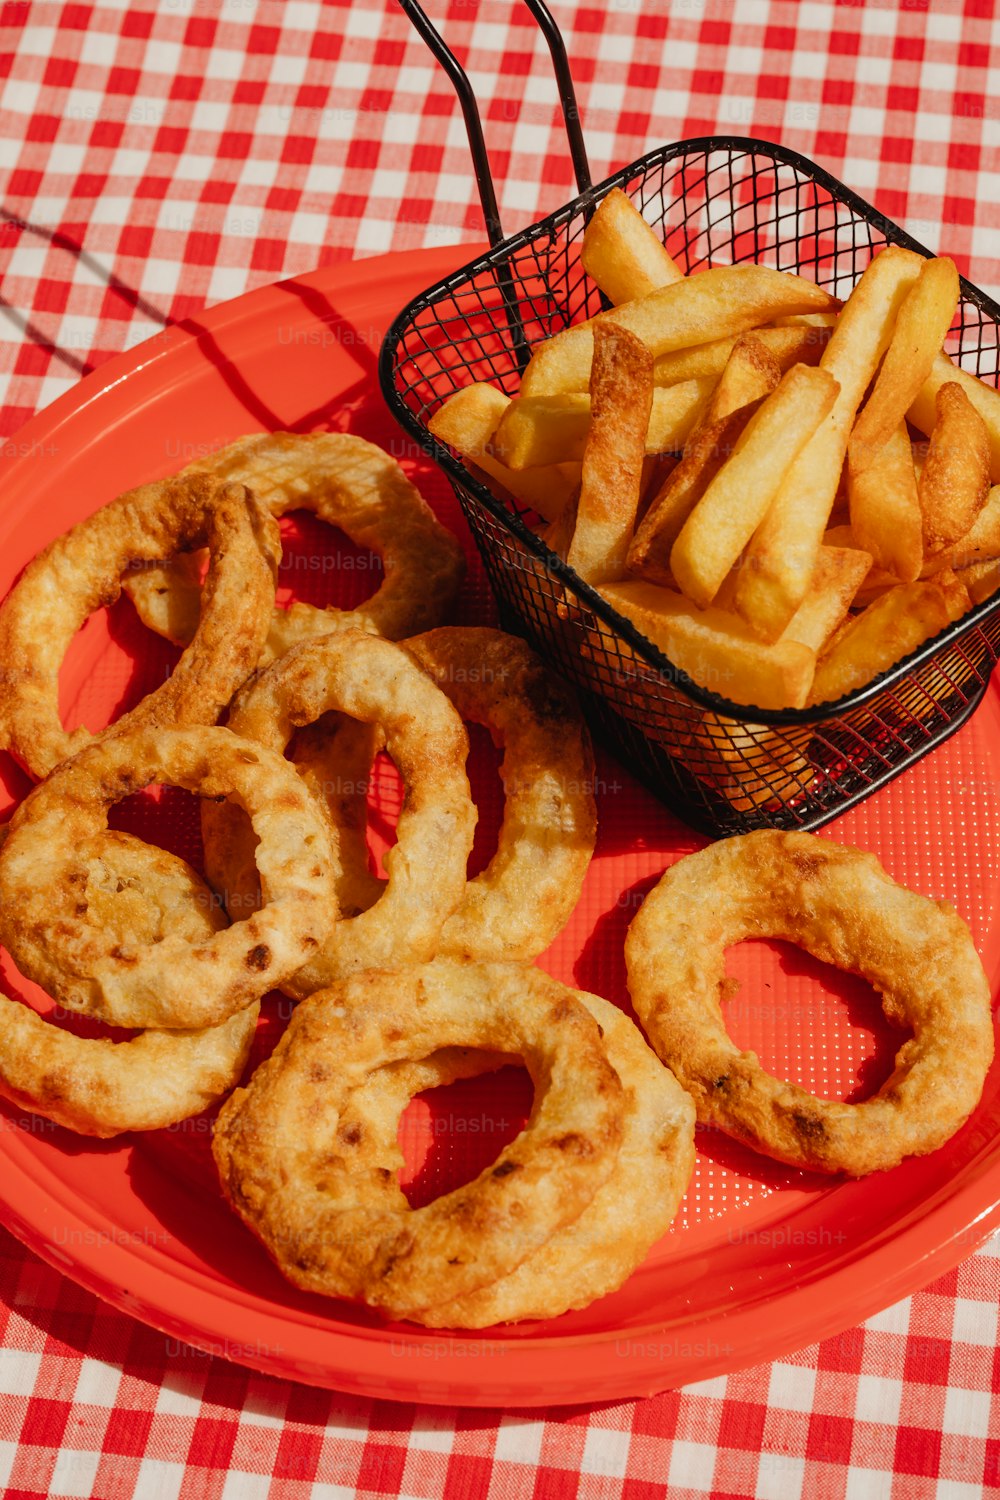 a red plate topped with onion rings next to a basket of fries